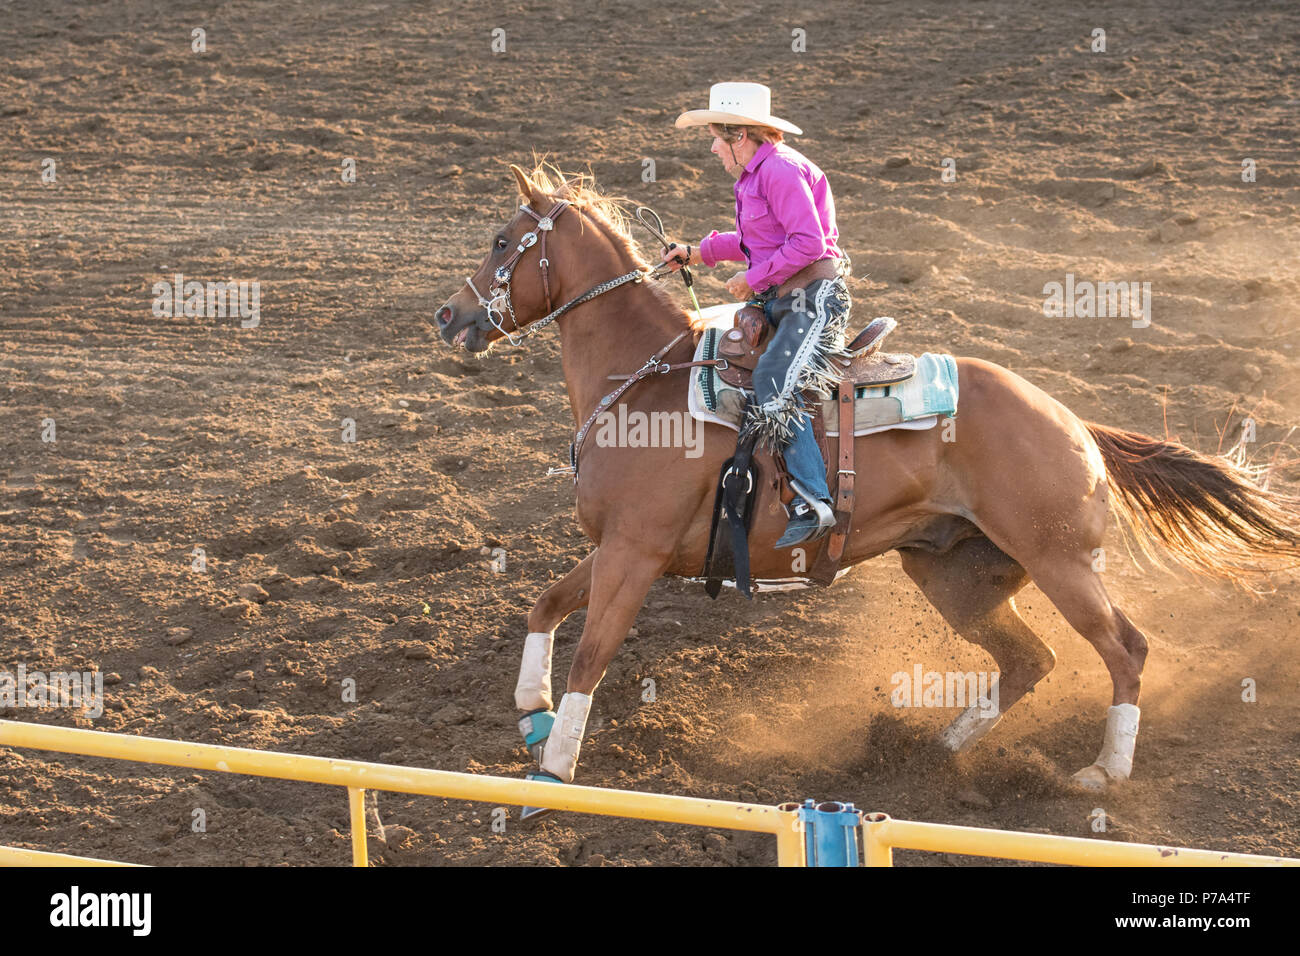 A cowgirl races her horse around a barrel during a barrel racing competition at the Airdrie Pro Rodeo. Stock Photo